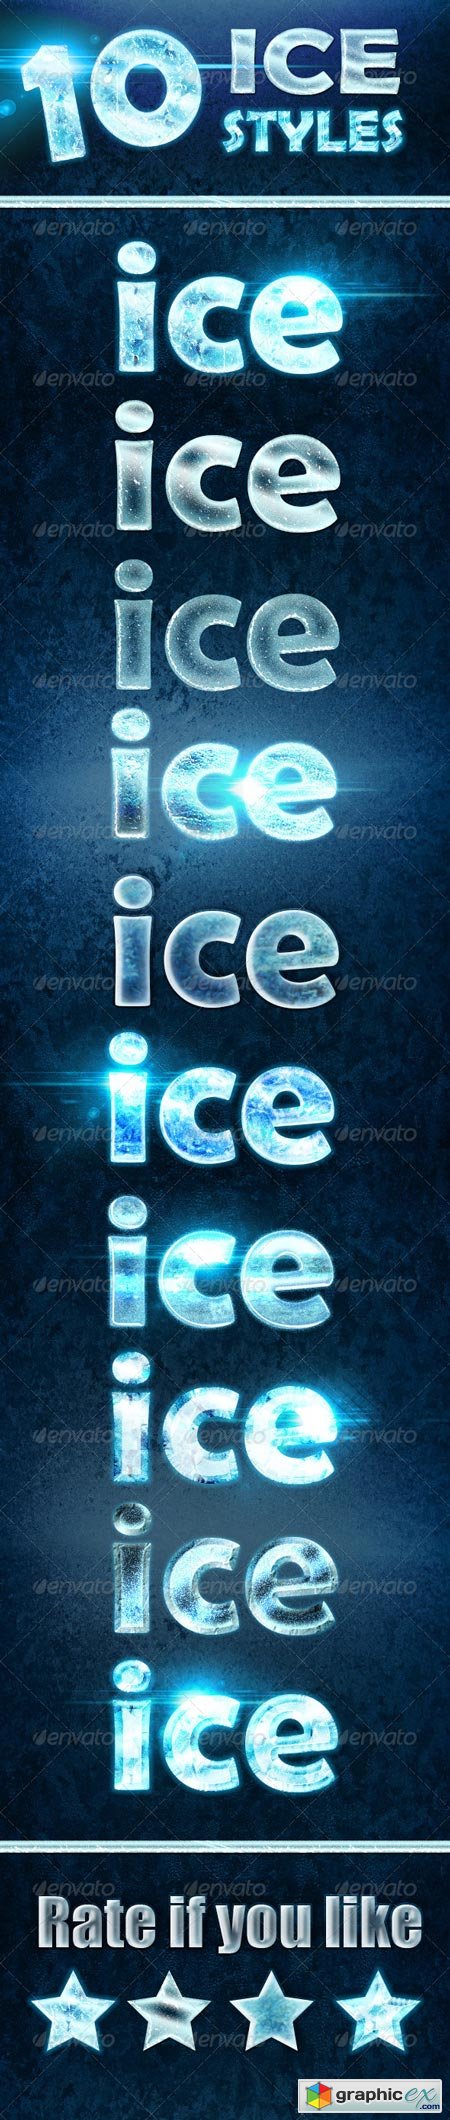 10 Ice and Frozen Effects 6296608